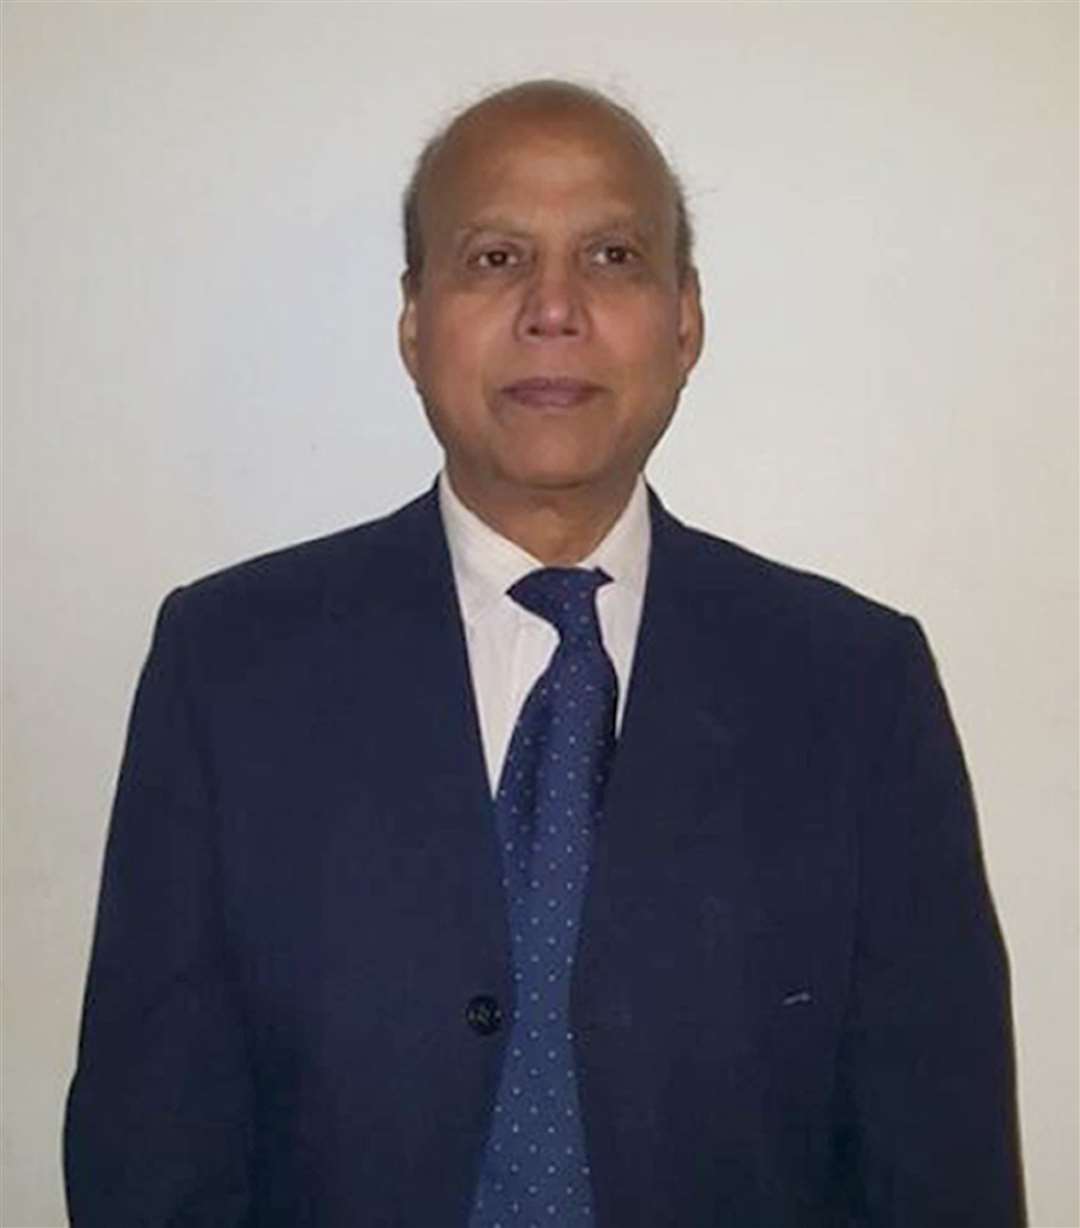 Mr Ahmed was described as having an ‘impeccable’ work ethic (London Ambulance Service/PA)